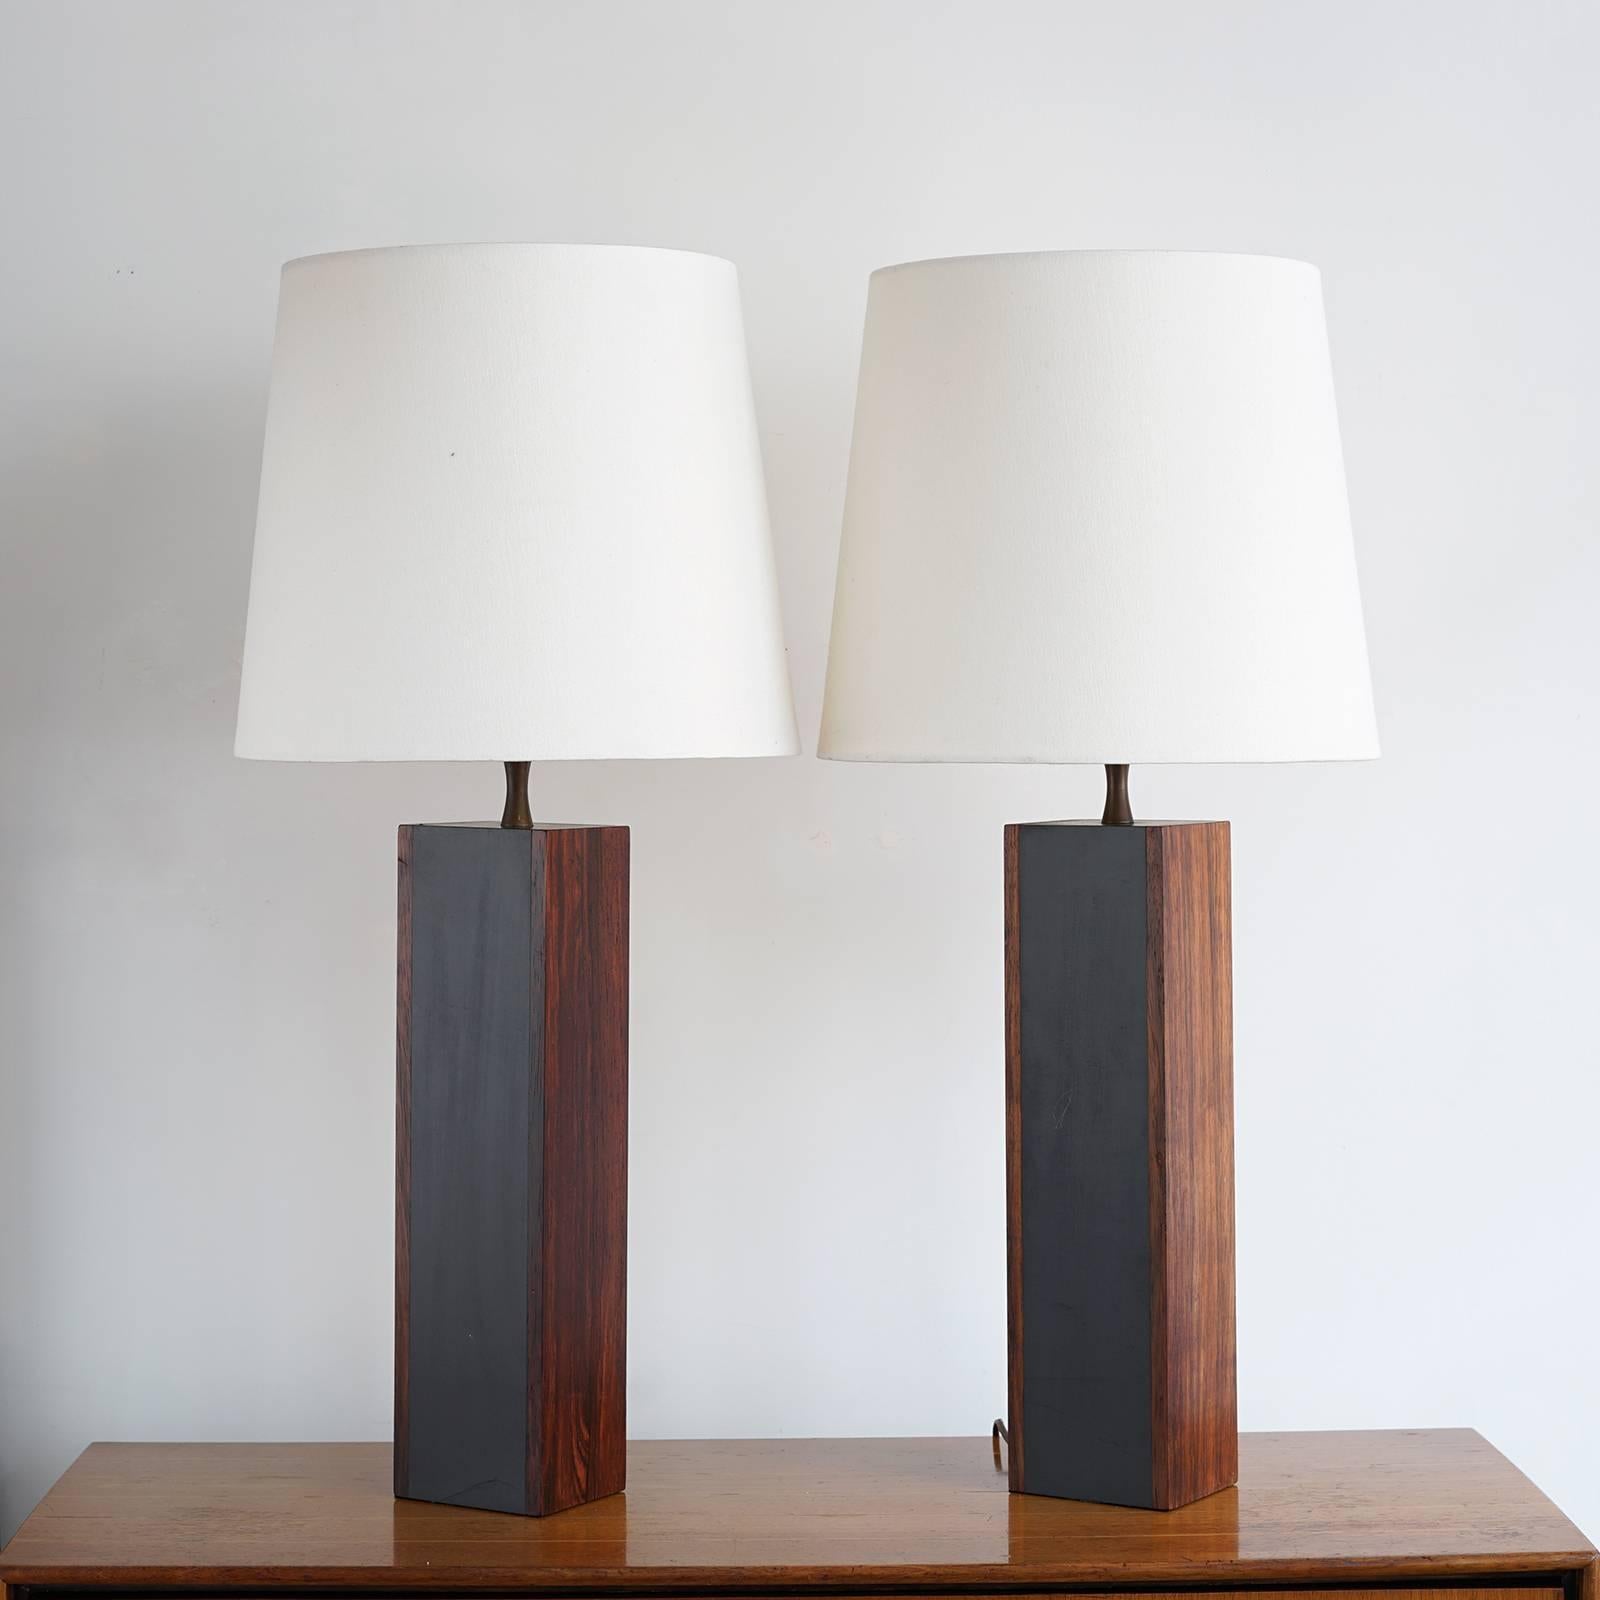 Elongated box form tower bases with solid Brazilian rosewood slabs to the front and back, contrasted by grey-black panels between. Highly figured wood grain and rich tone and color. Original sockets, harps and finials. Newer white fabric shades.